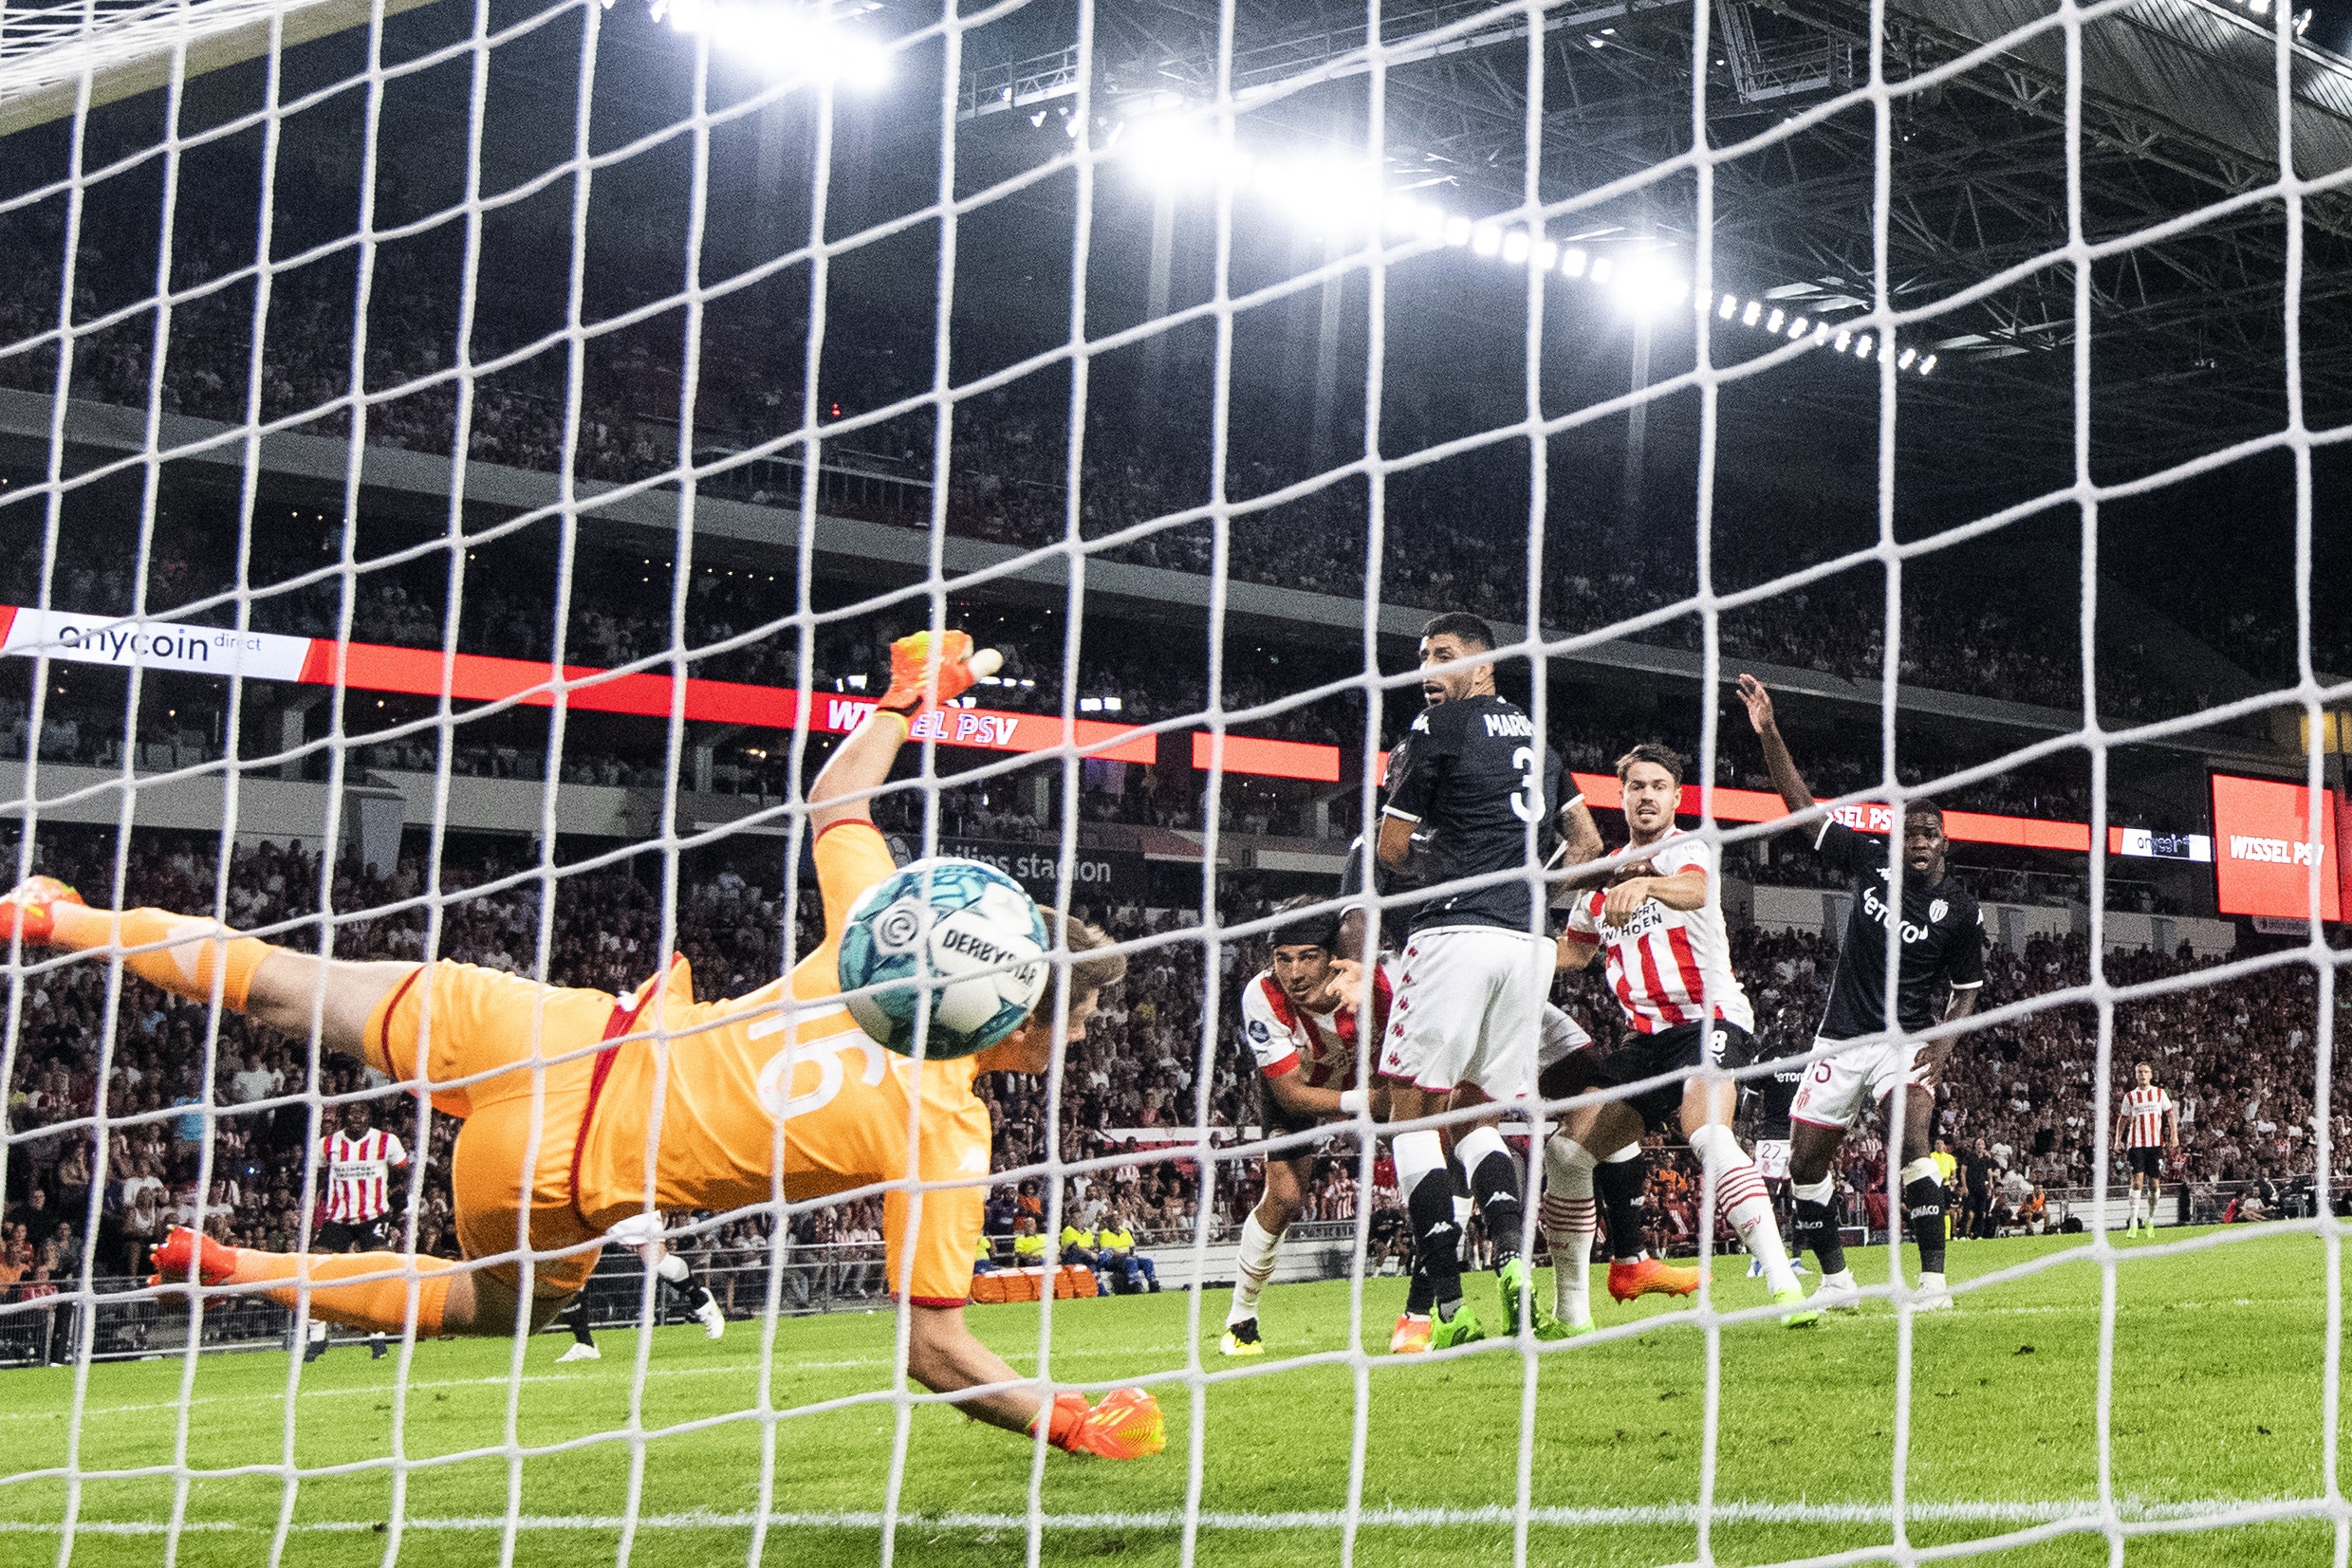 The ball flies into the back of the net as Alexander Nübel dives in front of it. Erick Gutierrez, the scorer, looks on.